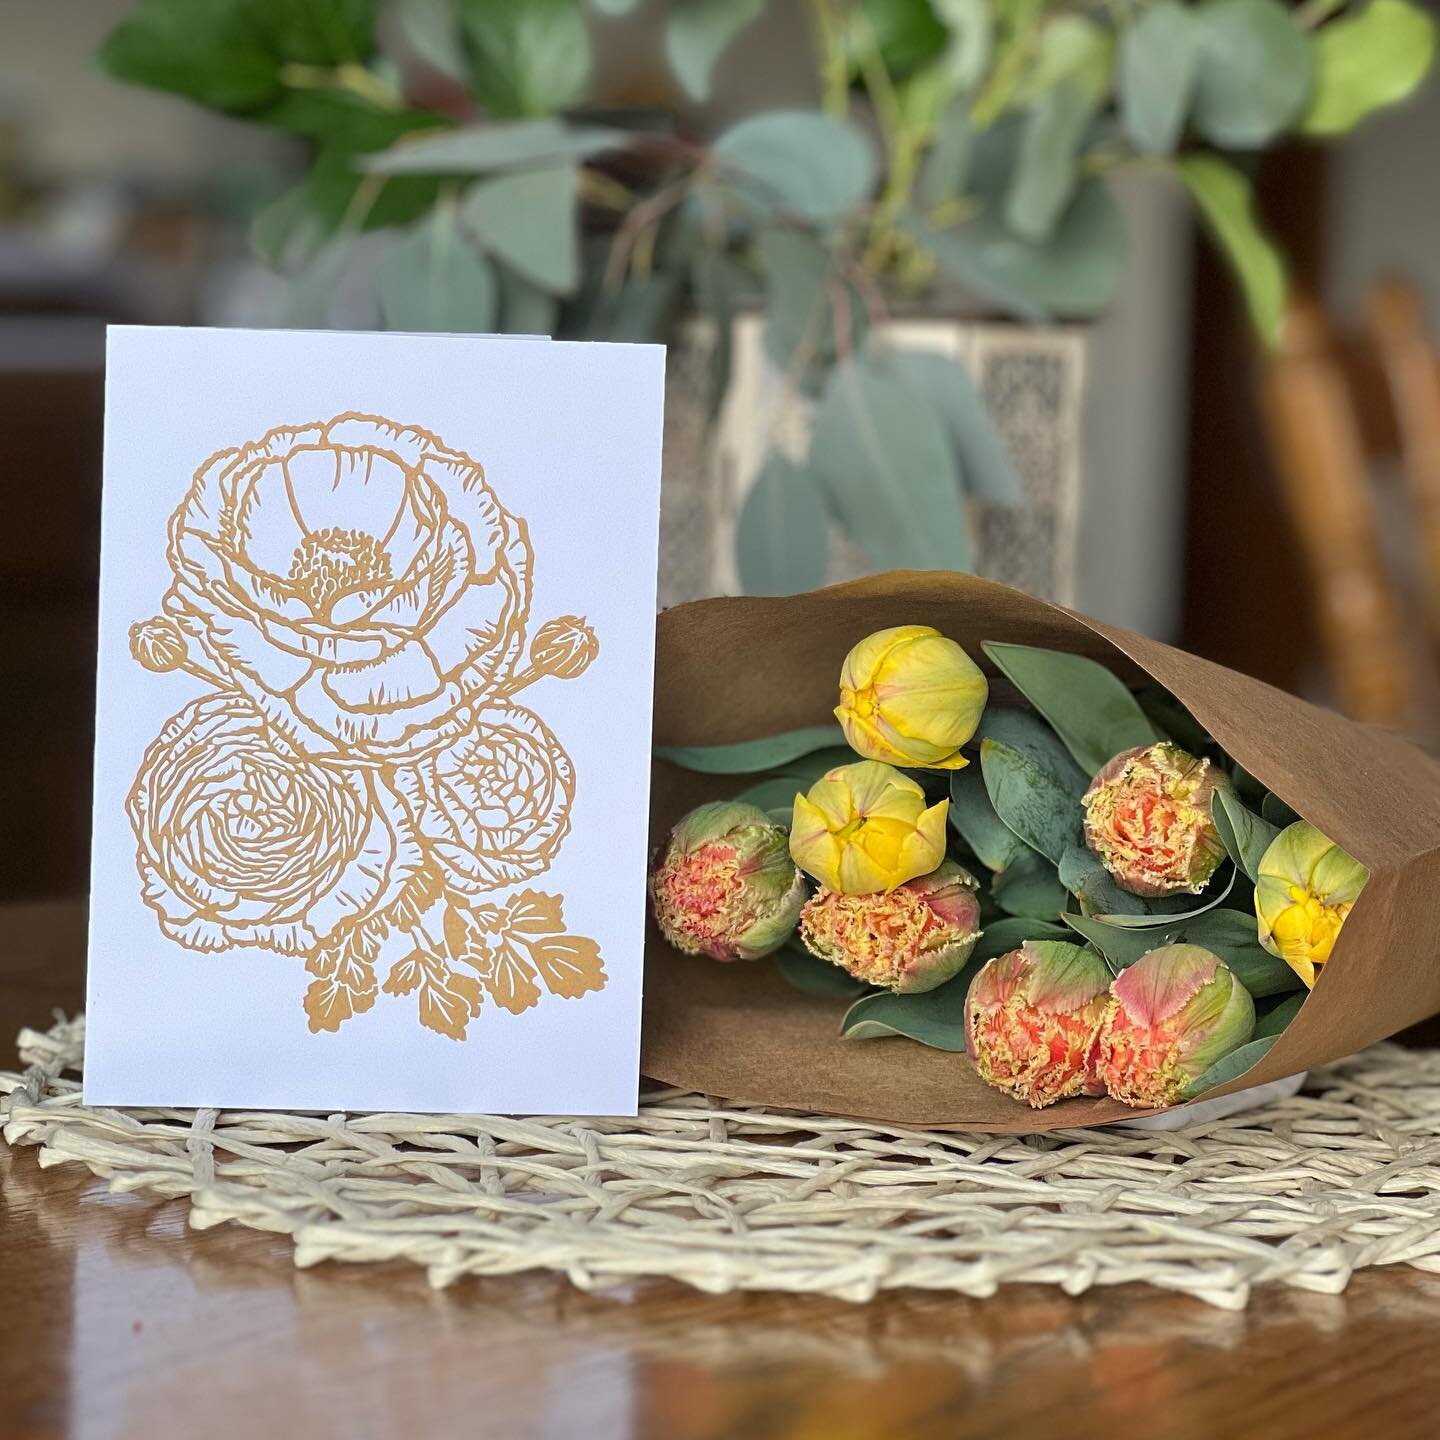 We&rsquo;re teaming up with @stardogcreations this year to make Mother&rsquo;s Day very special! 💌💐

Join us at our little Mother&rsquo;s Day Market next Saturday. We&rsquo;ll have fresh cut flowers grown by McCullough Flower Farm and handmade lino